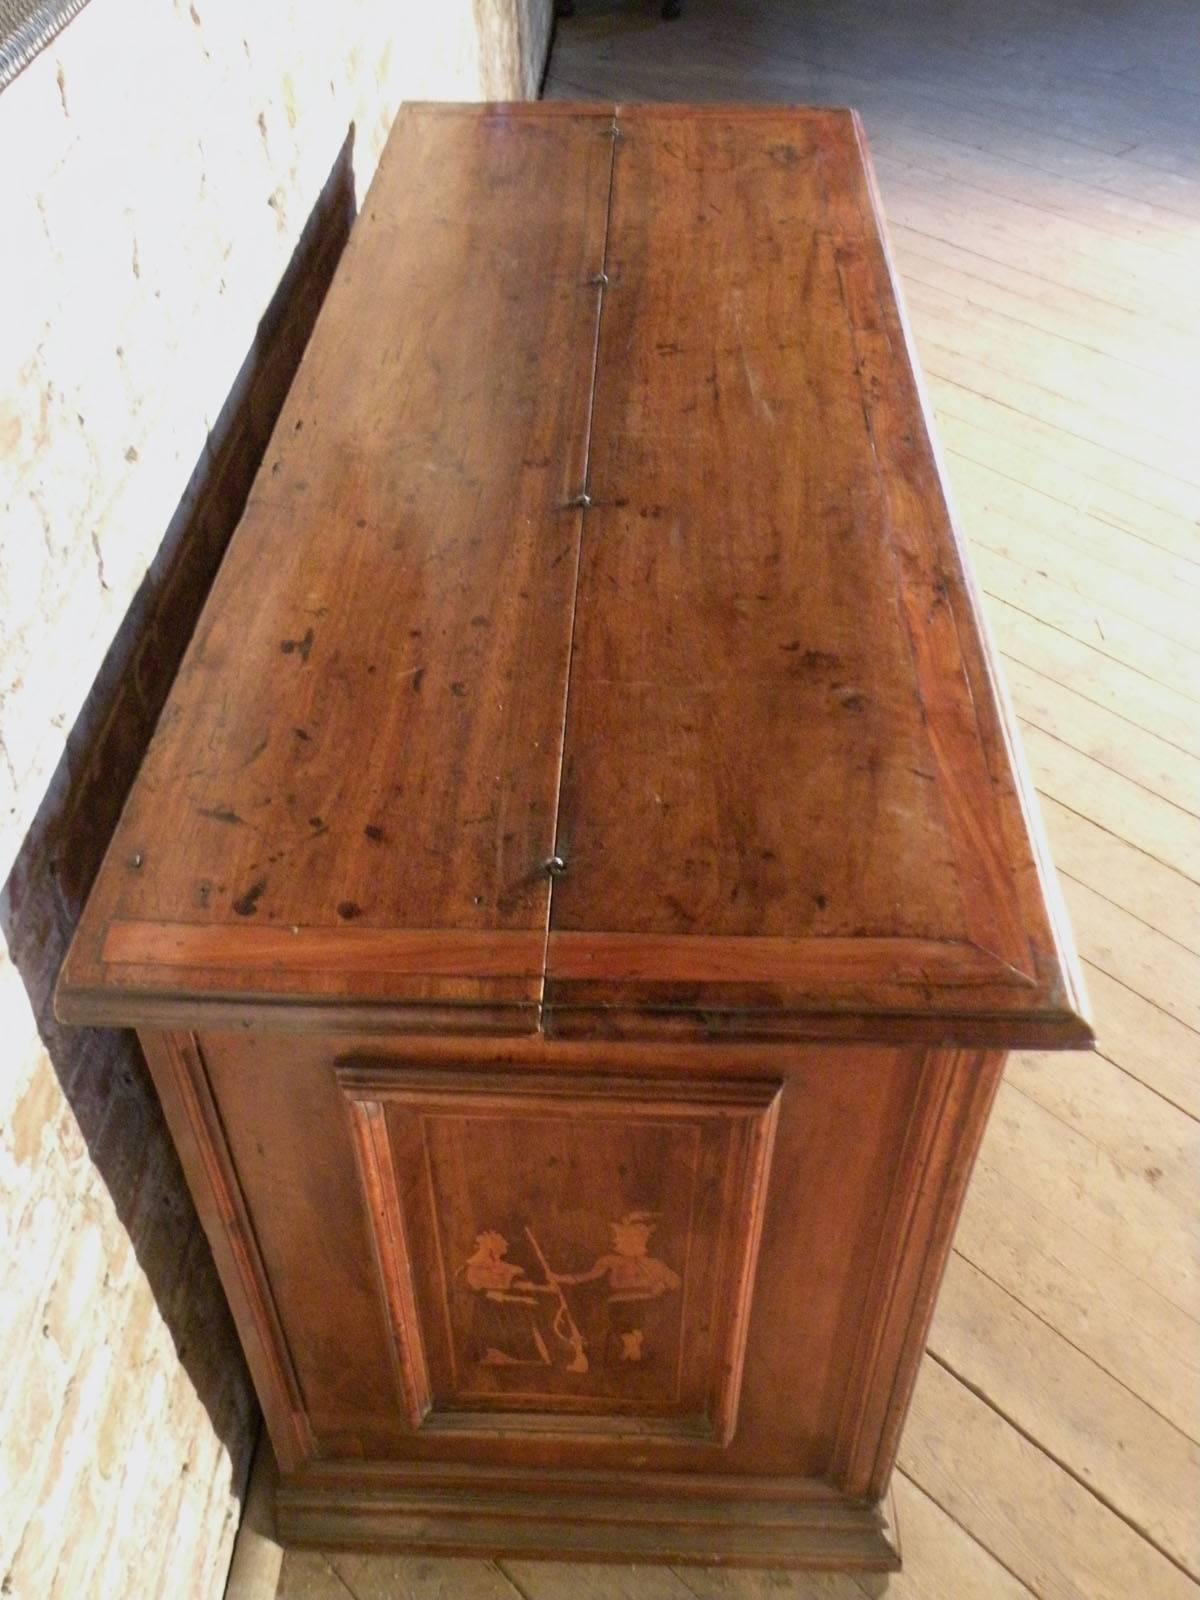 Italian Baroque Inlaid Early 18th Century Walnut and Fruit Wood Desk-Commode In Good Condition For Sale In Troy, NY